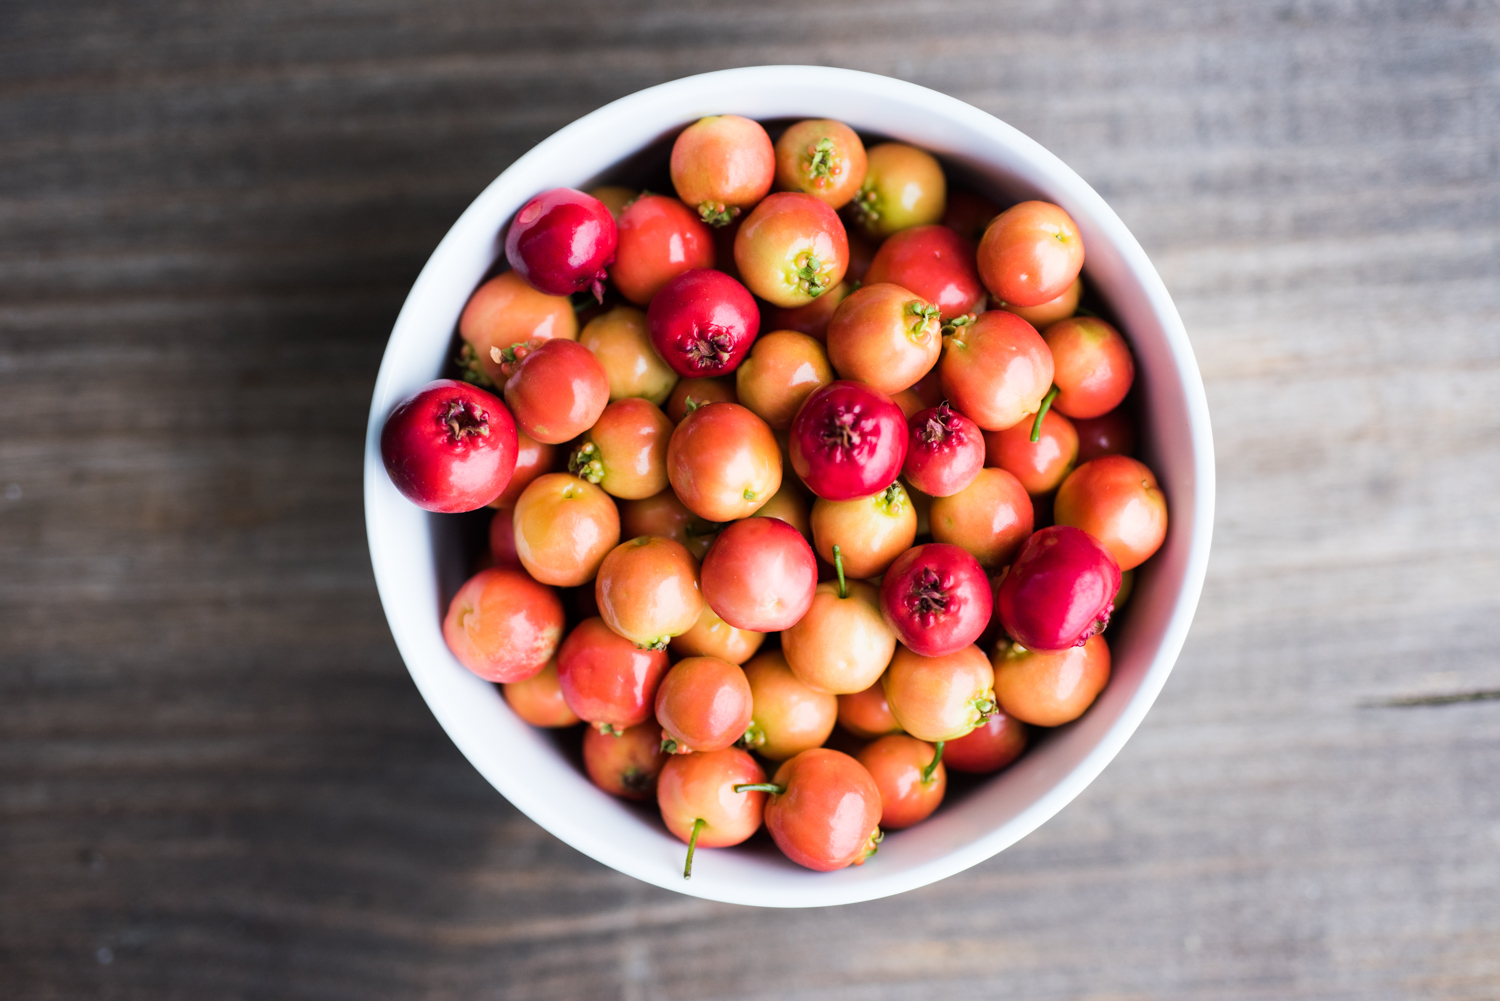 mayhaw fruit in a bowl